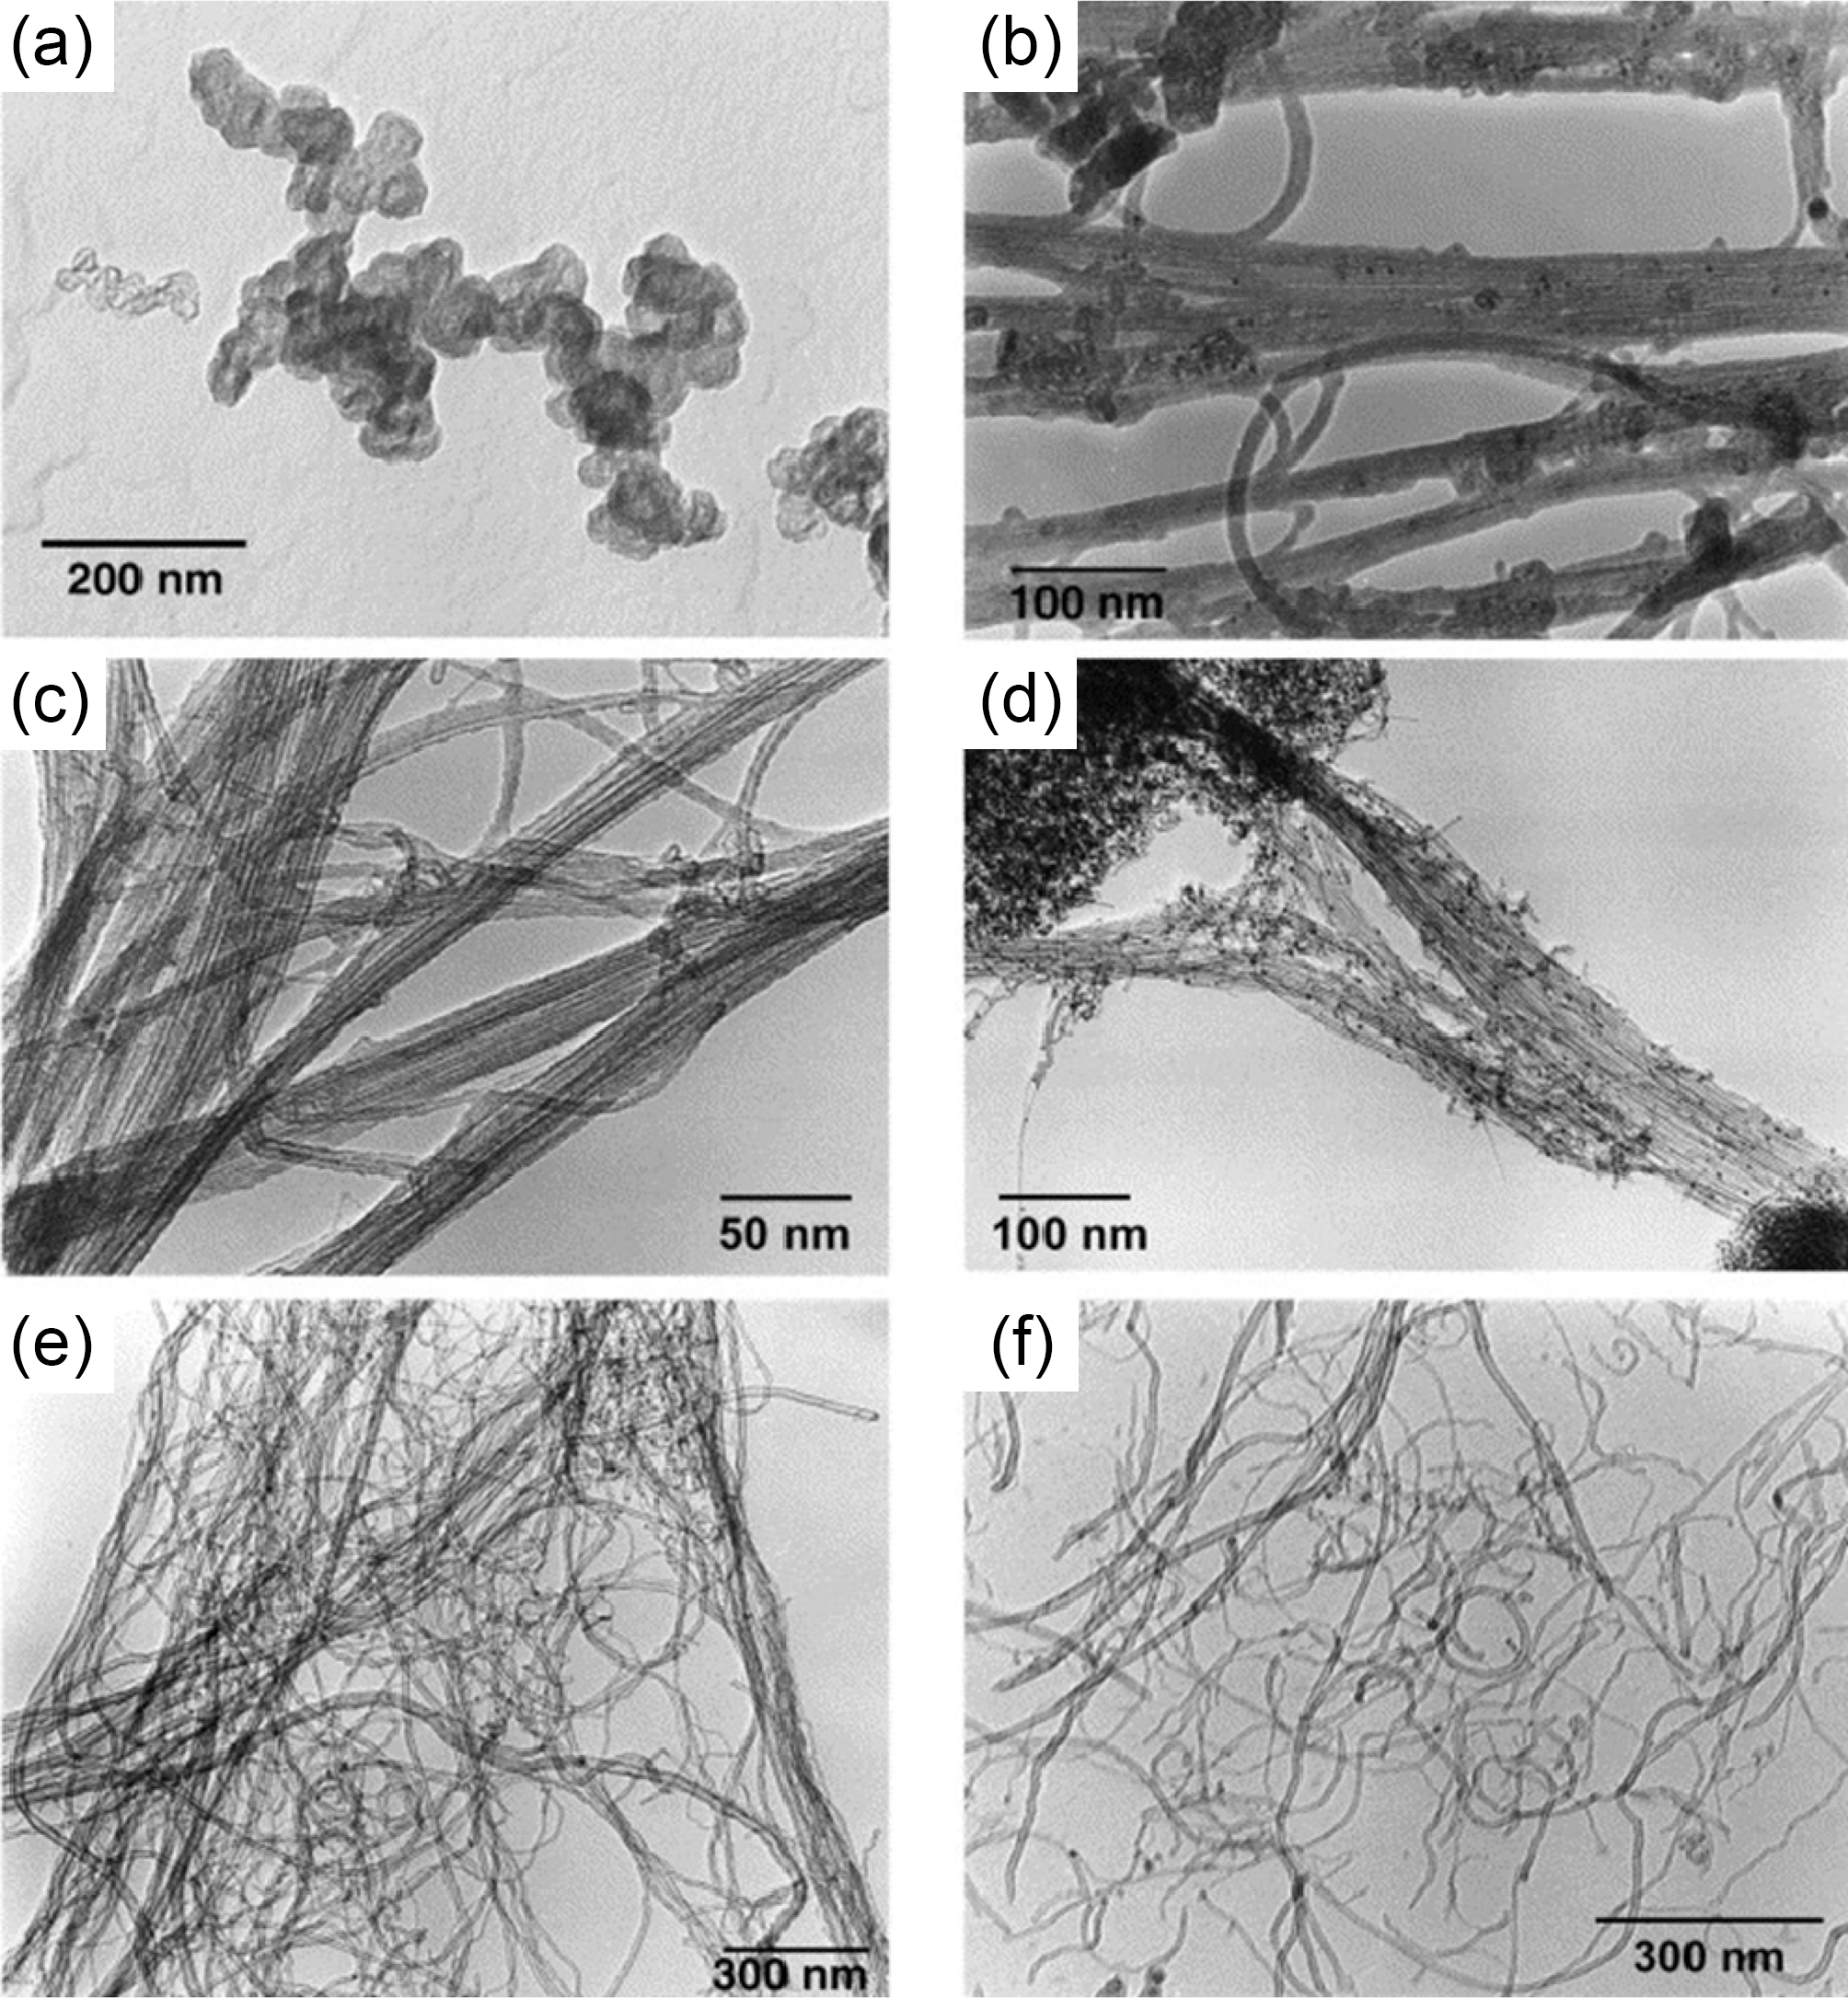 TEM-images of the nanofillers: (a) carbon black (b) singlewall CNT (c) doublewall CNT (d) amino-functionalized doublewall CNT (e) multiwall CNT and (f) amino-functionalized multiwall CNT [31].